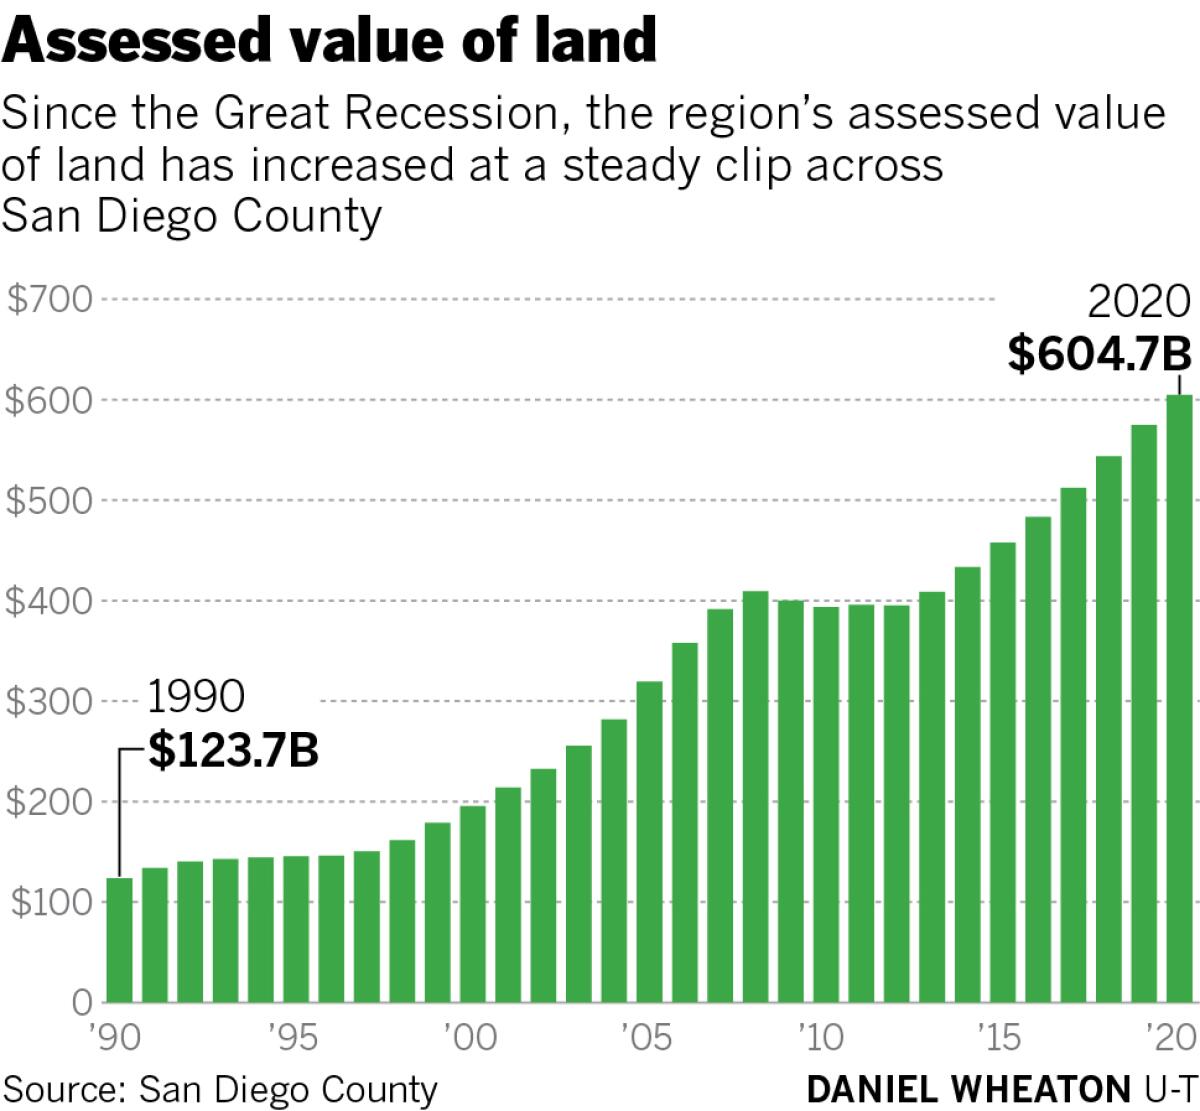 Assessed value of land